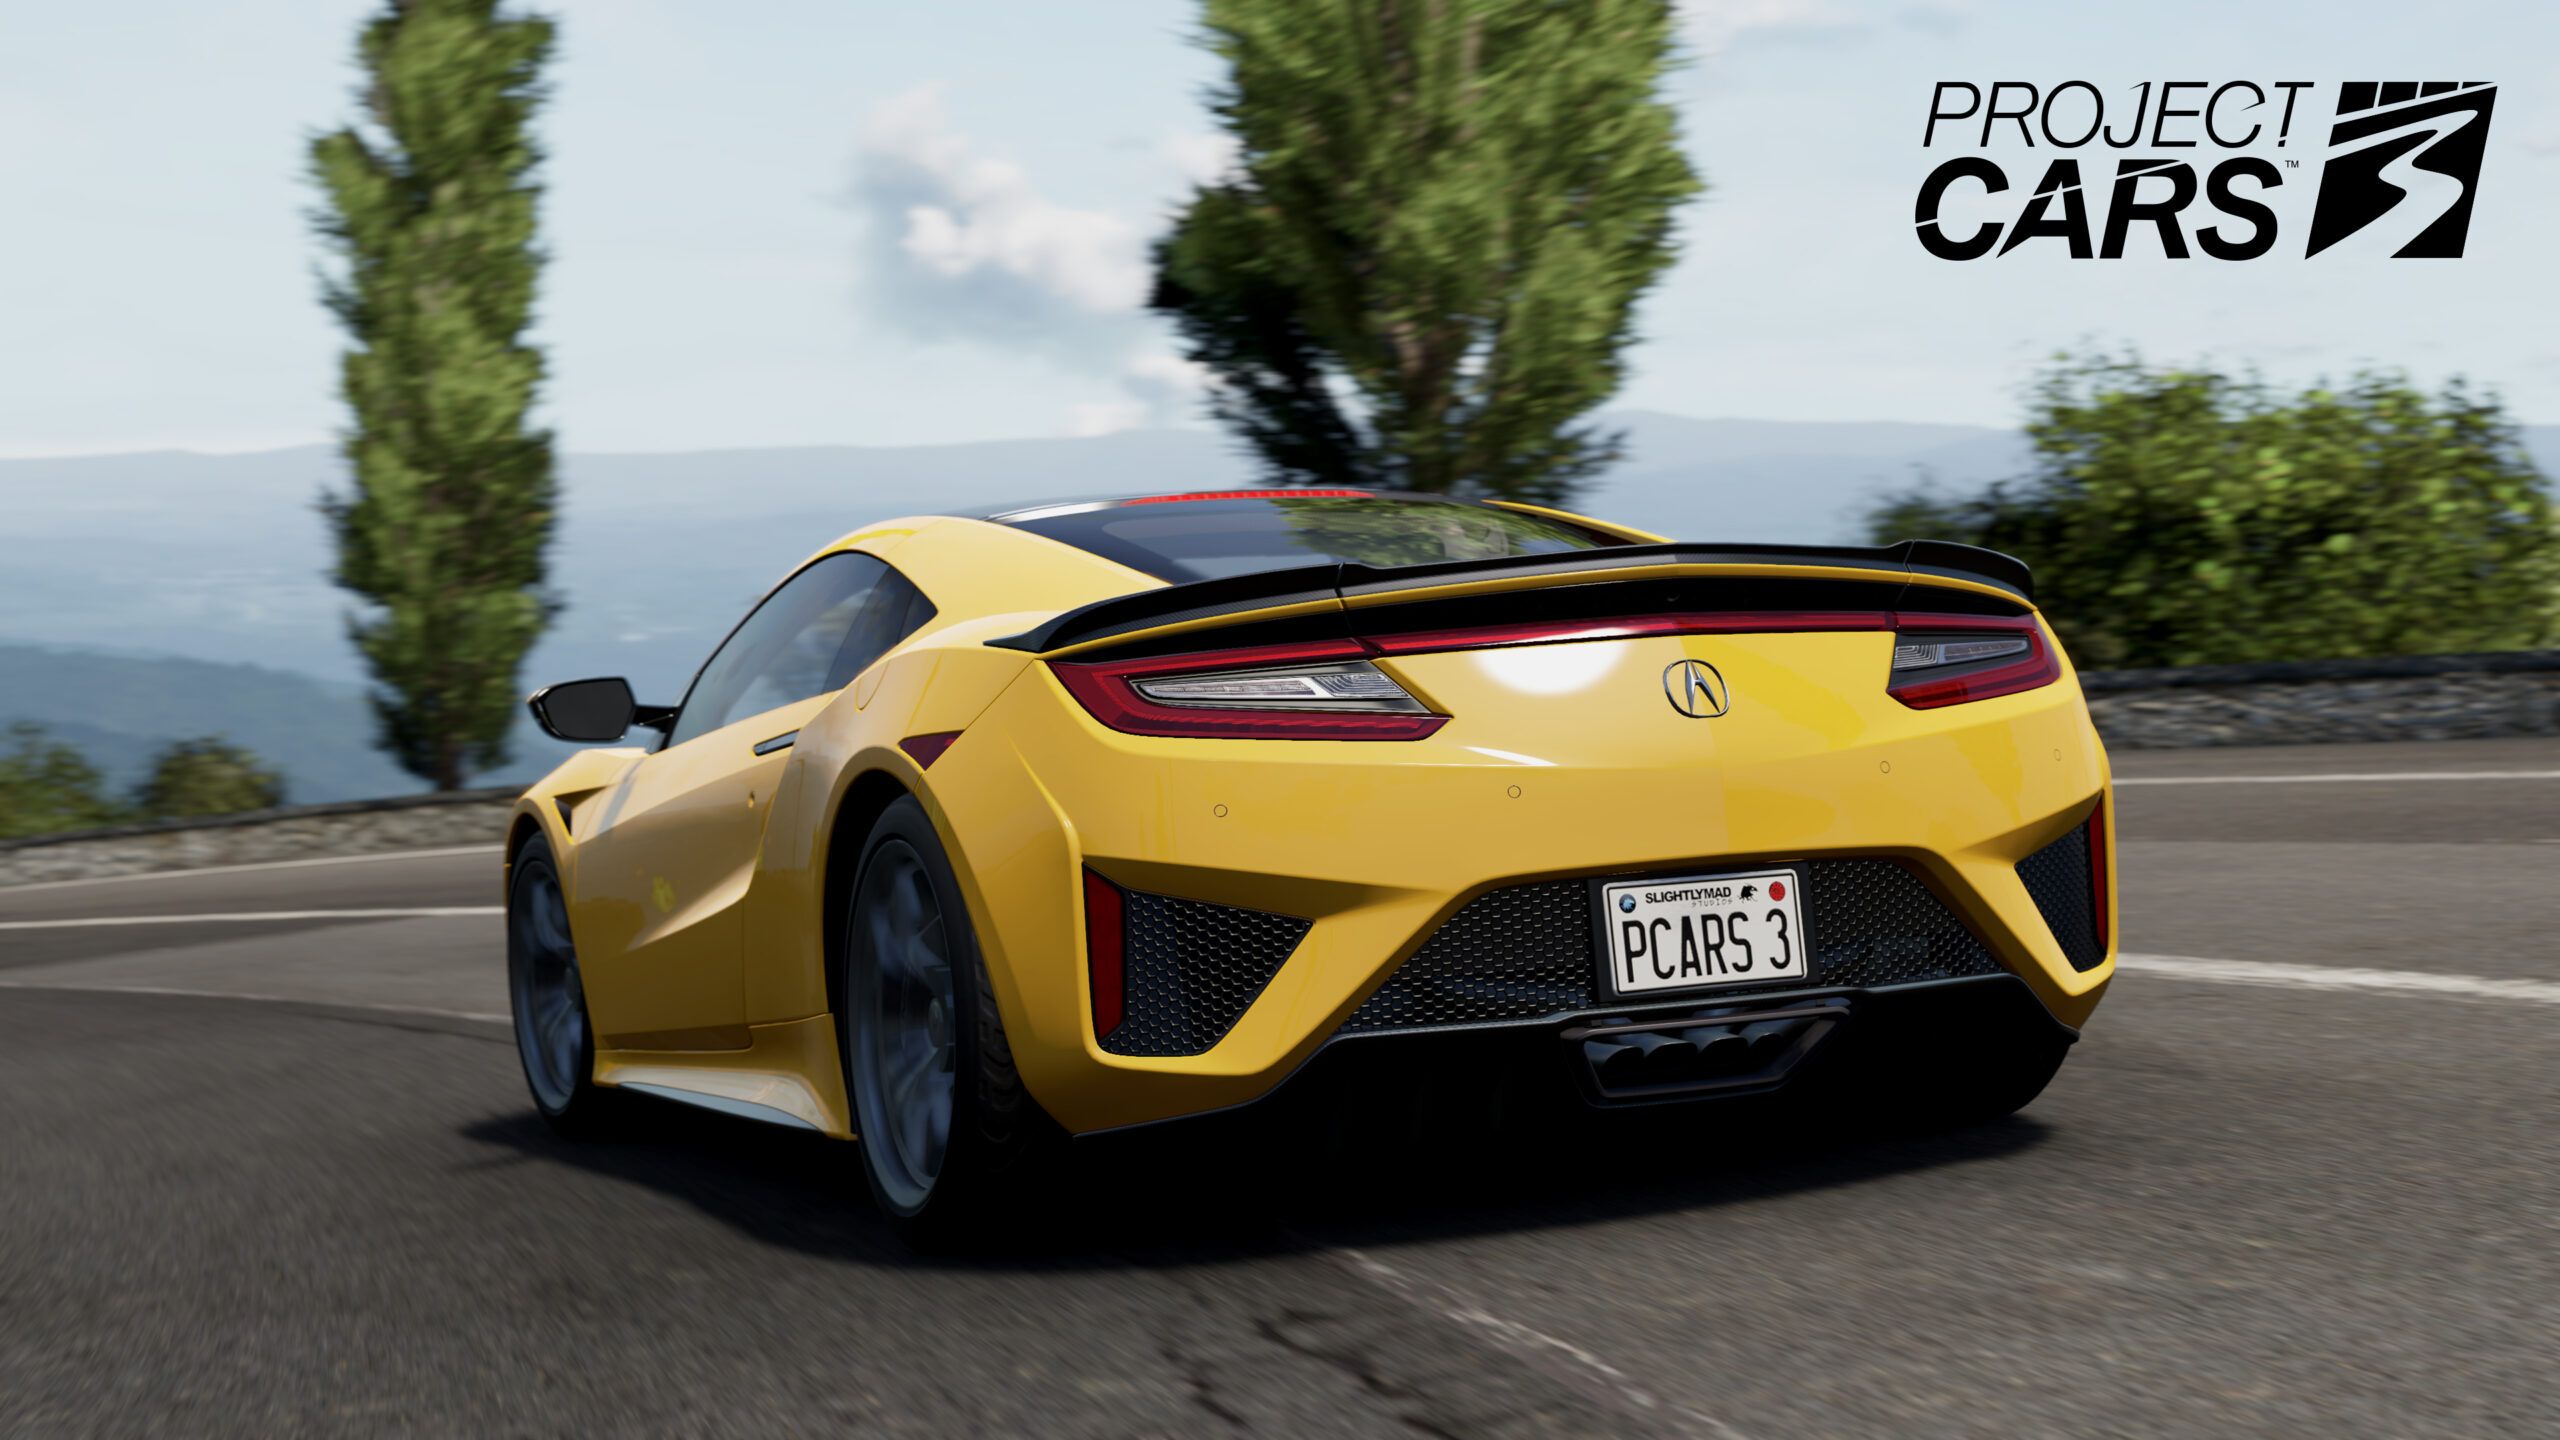 Project CARS 3 Is Coming Out August 28th on PC, PlayStation 4